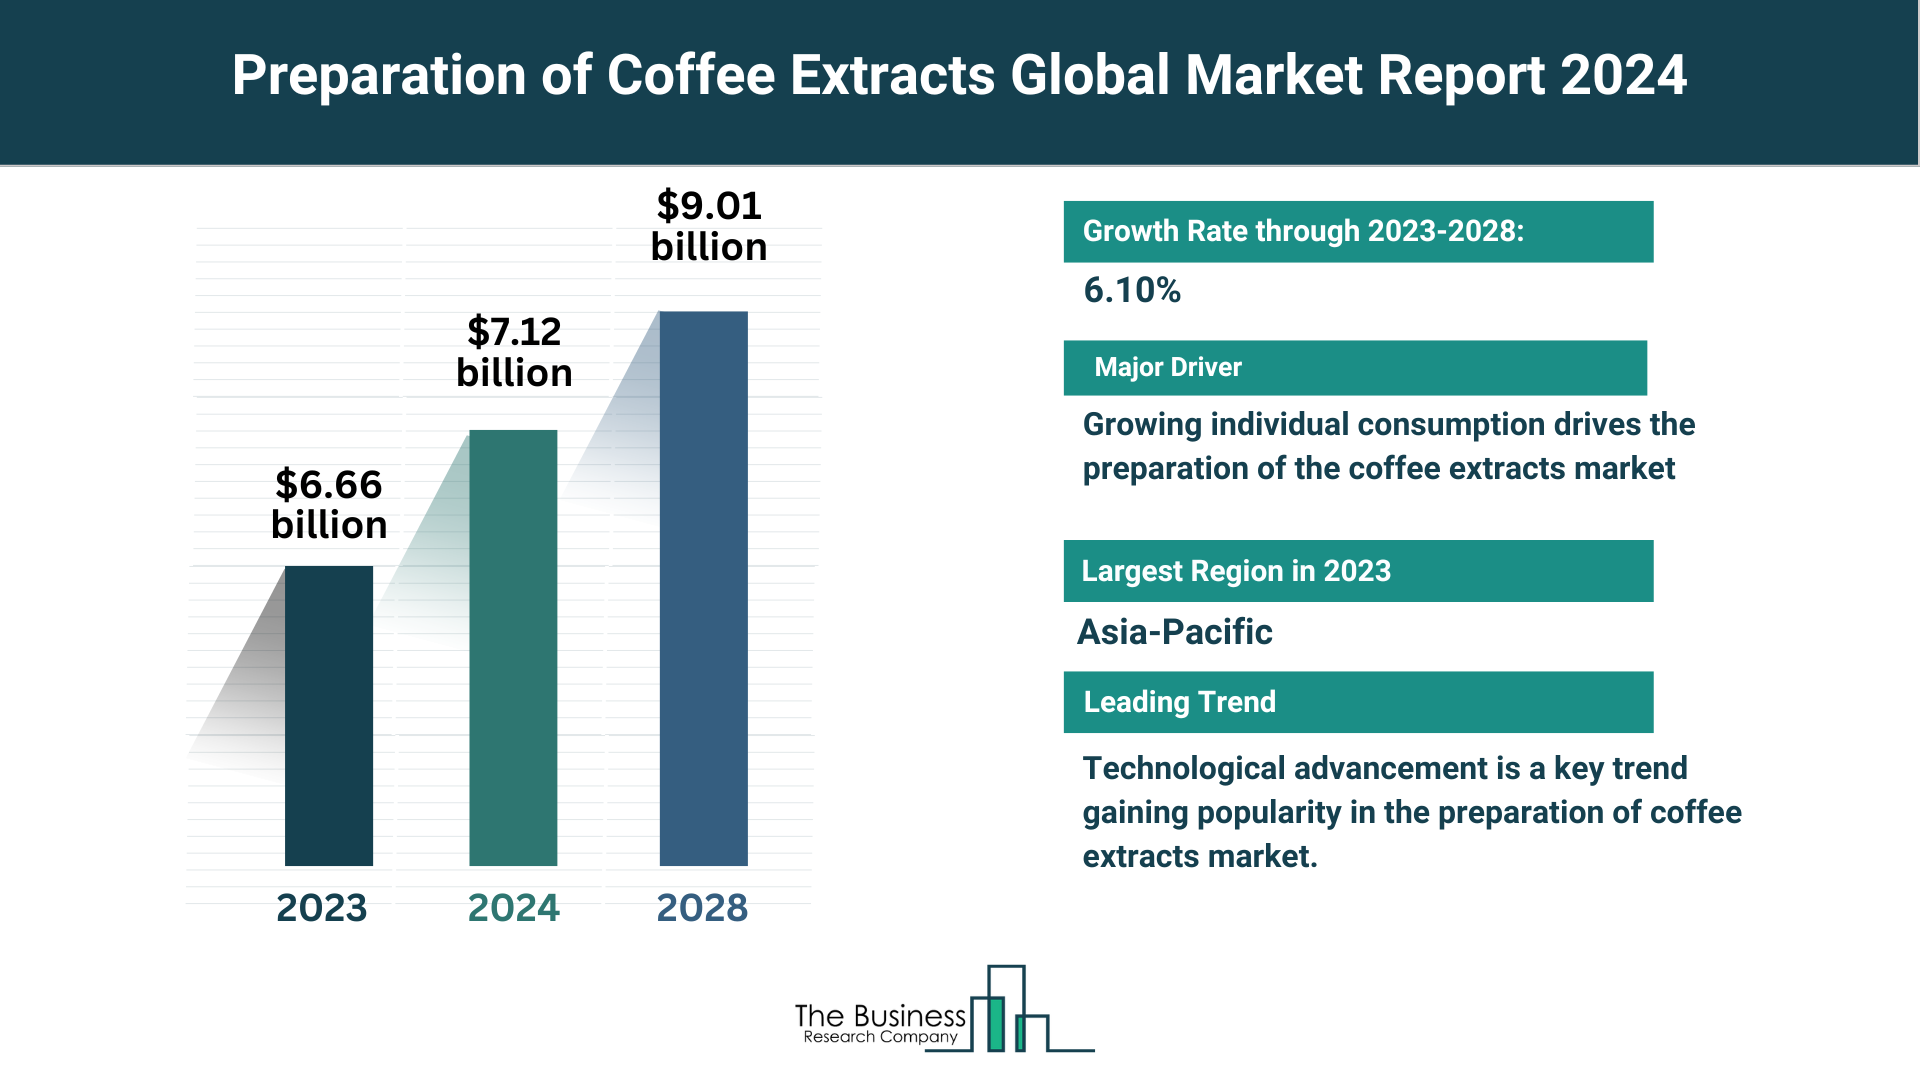 How Is the Preparation of Coffee Extracts Market Expected To Grow Through 2024-2033?